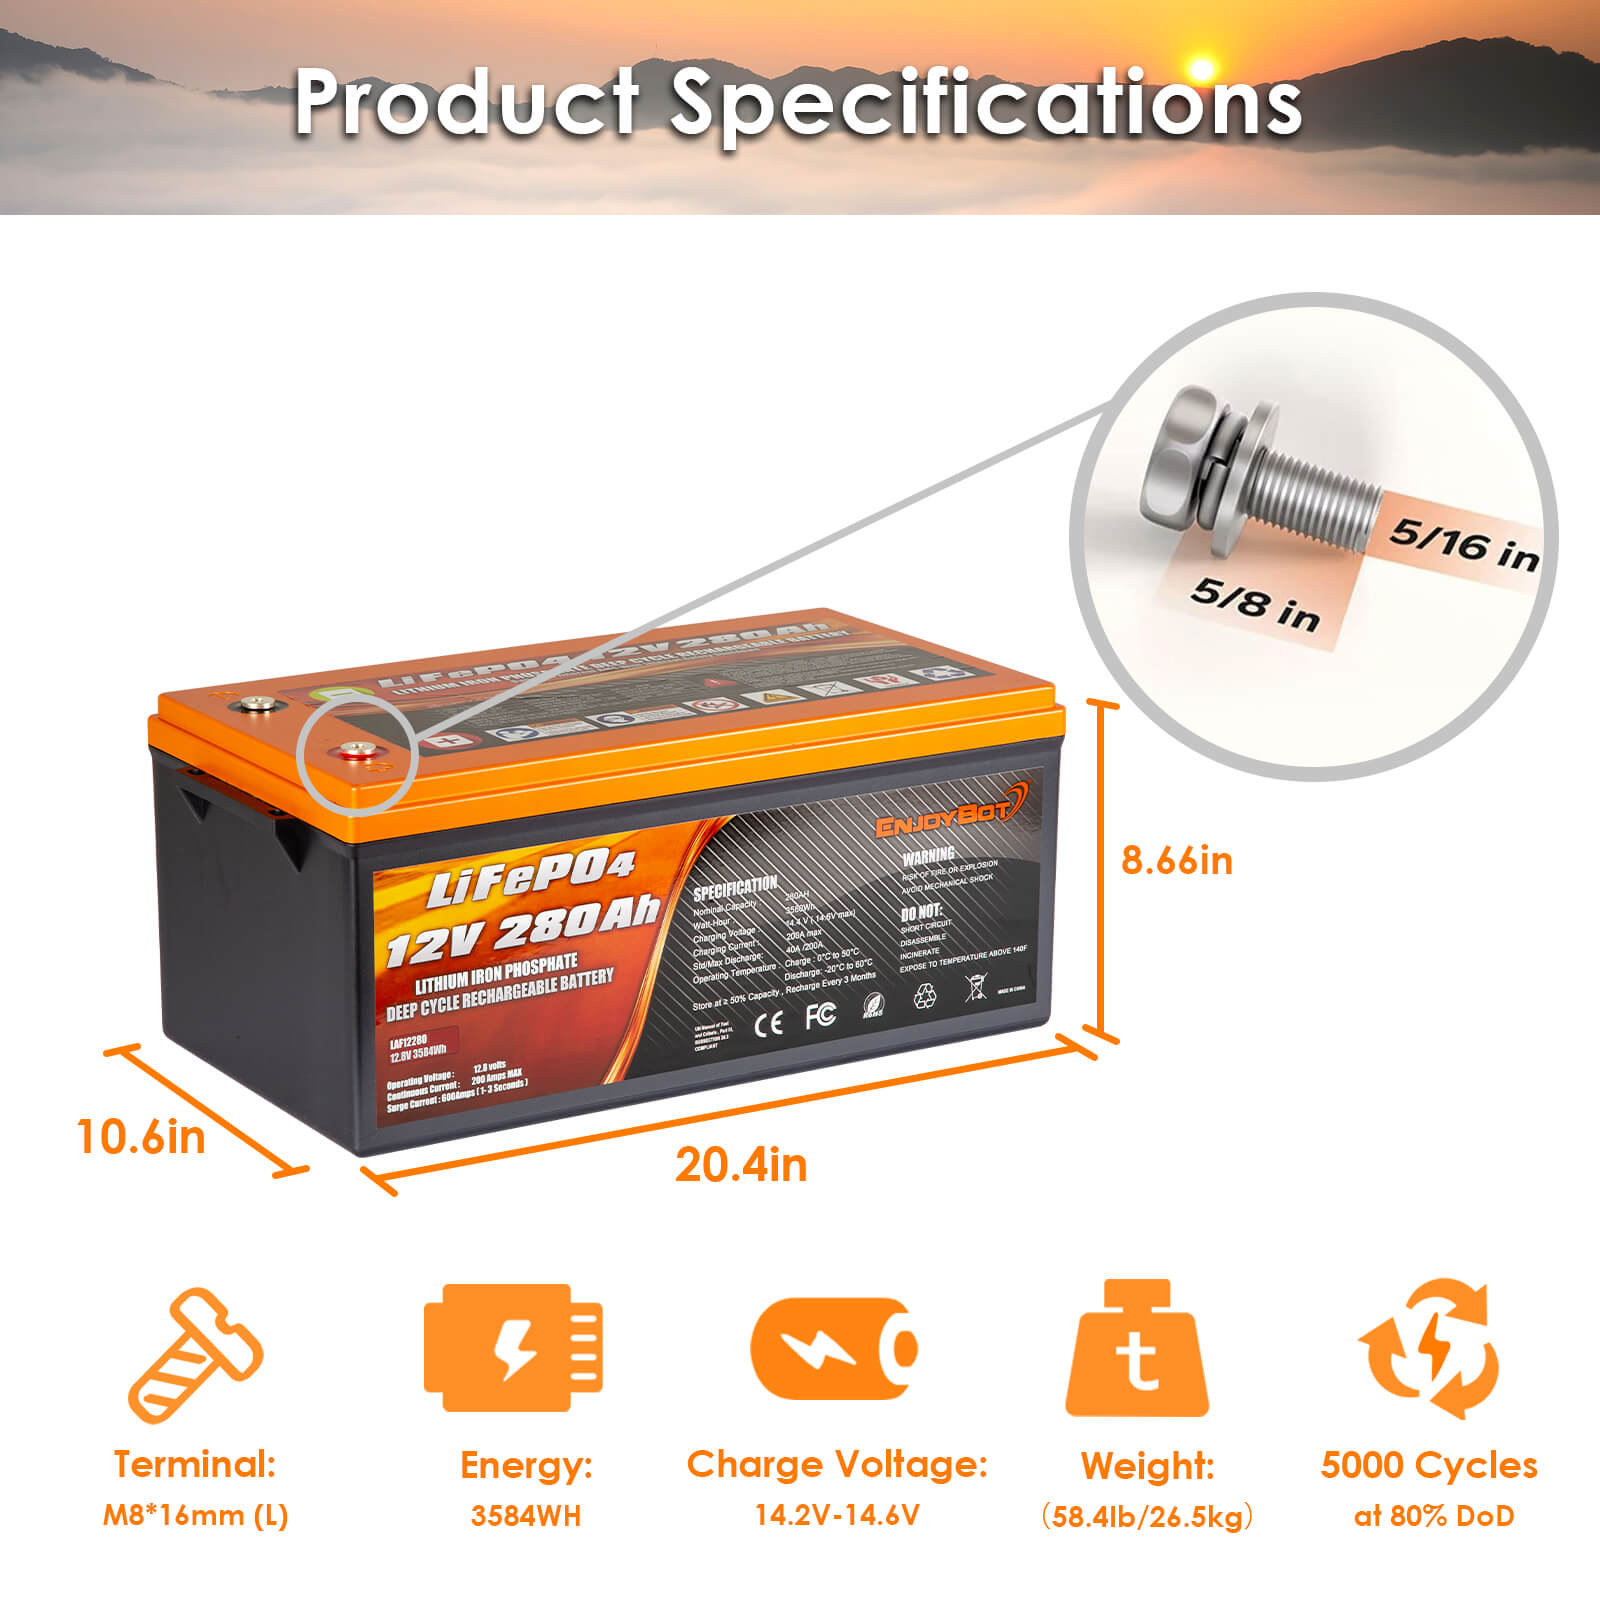 Enjoybot LiFePO4 Battery 12V 280Ah Lithium Battery, Built-In 200A BMS Low Temperature Cut Off Lithium Iron Phosphate Battery Perfect for RV, Solar